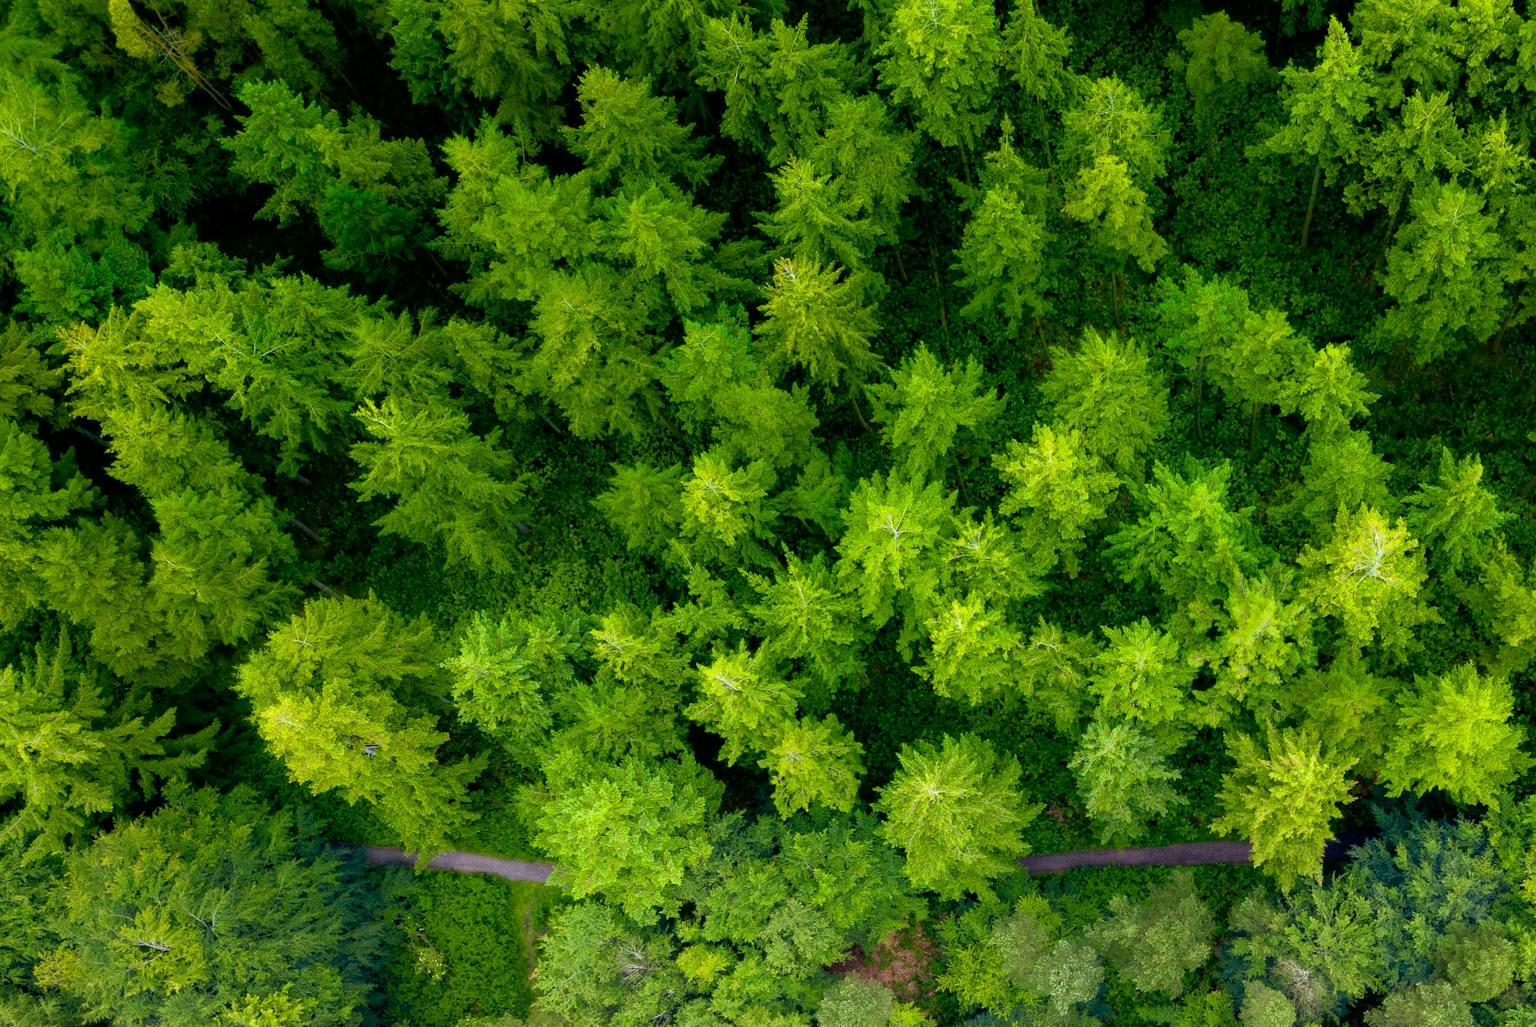 Aerial view of a lush green forest with a winding dirt path cutting through the middle. The dense canopy of trees creates a vibrant tapestry of textures and shades